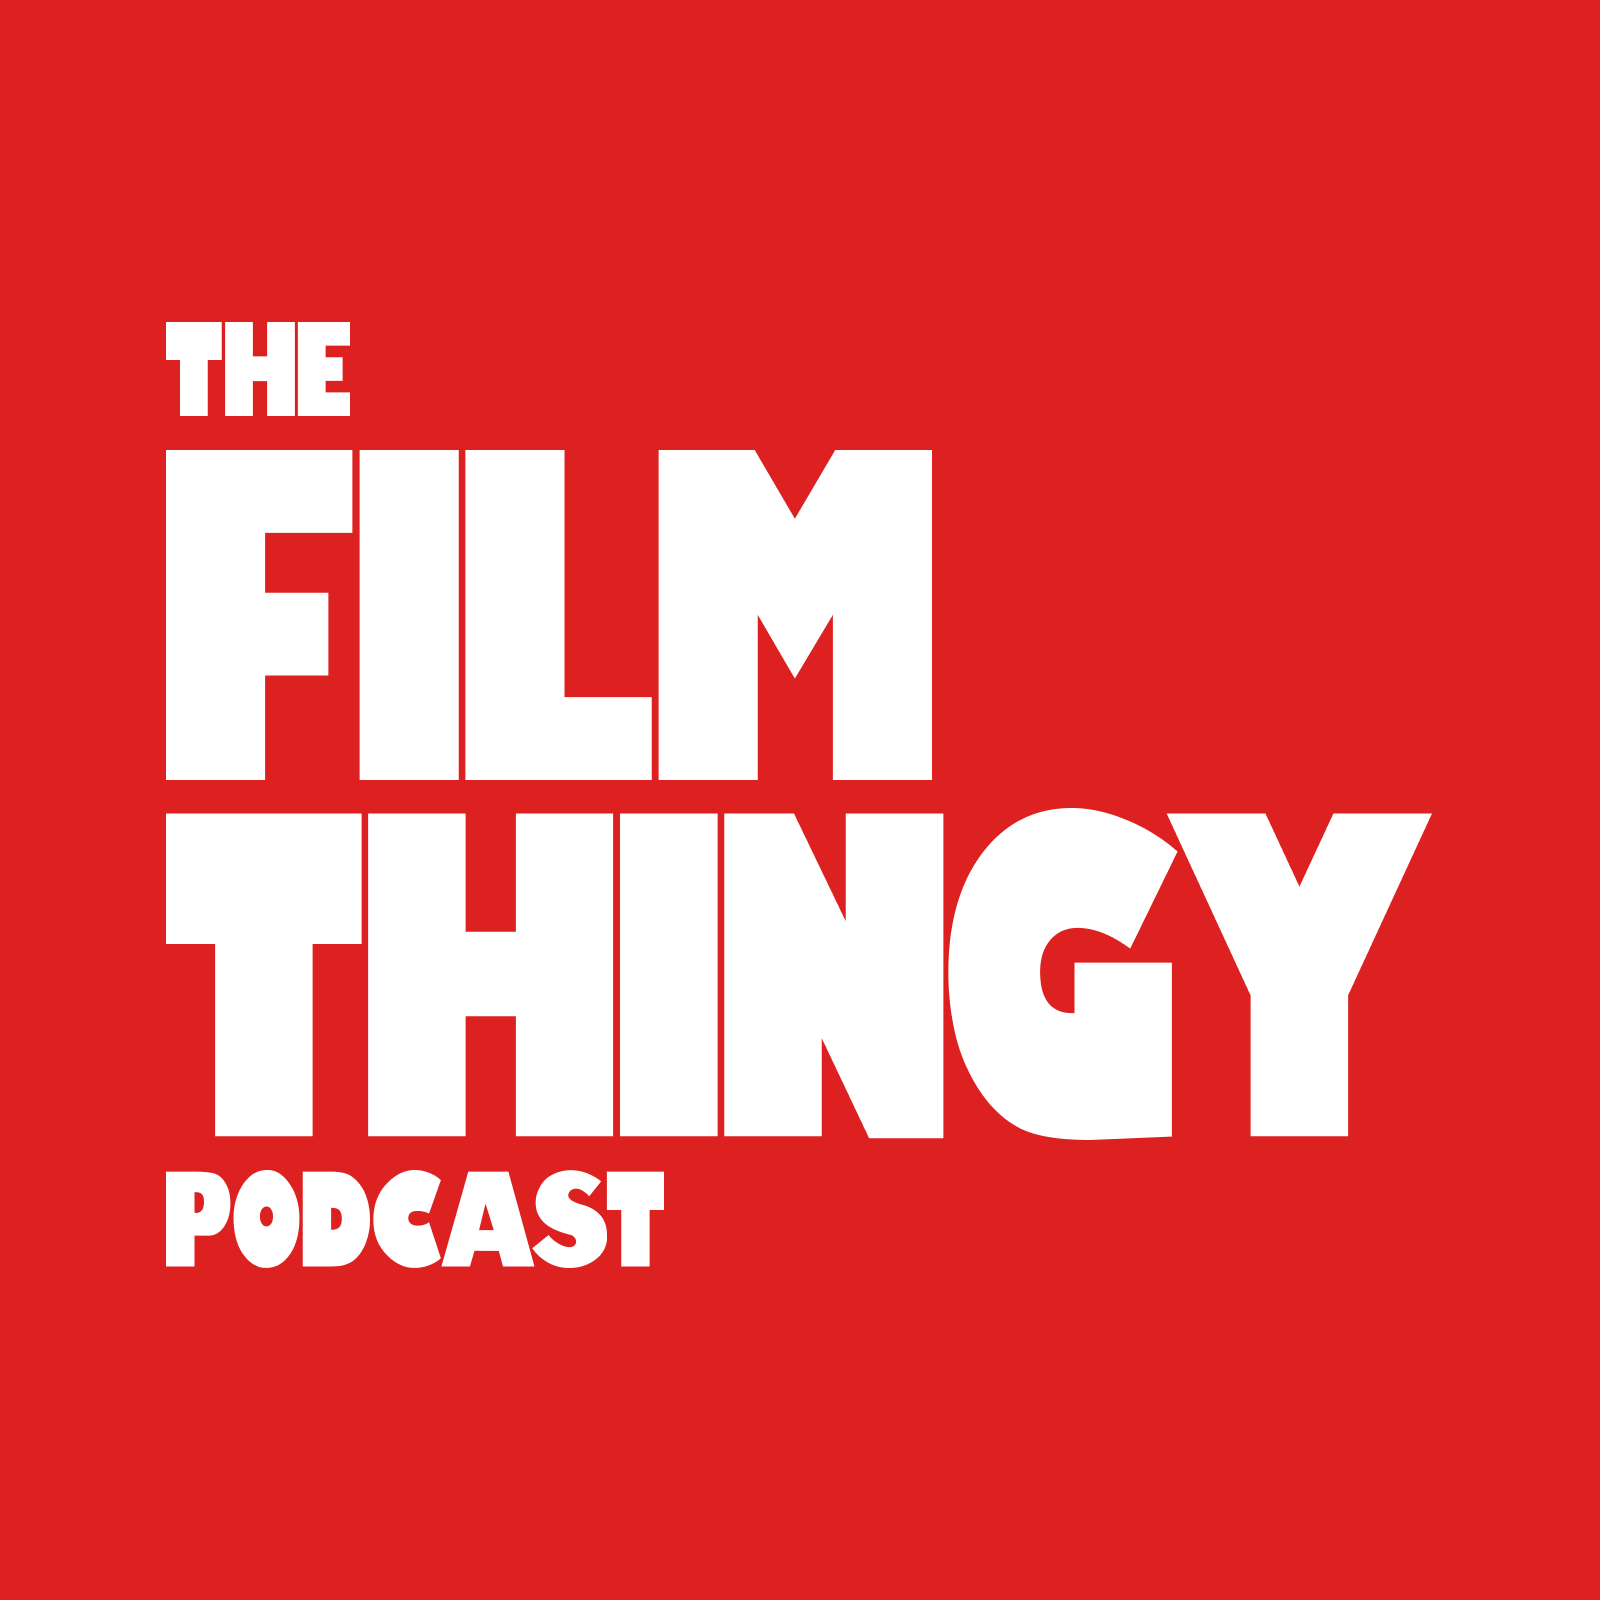 The Film Thingy Podcast